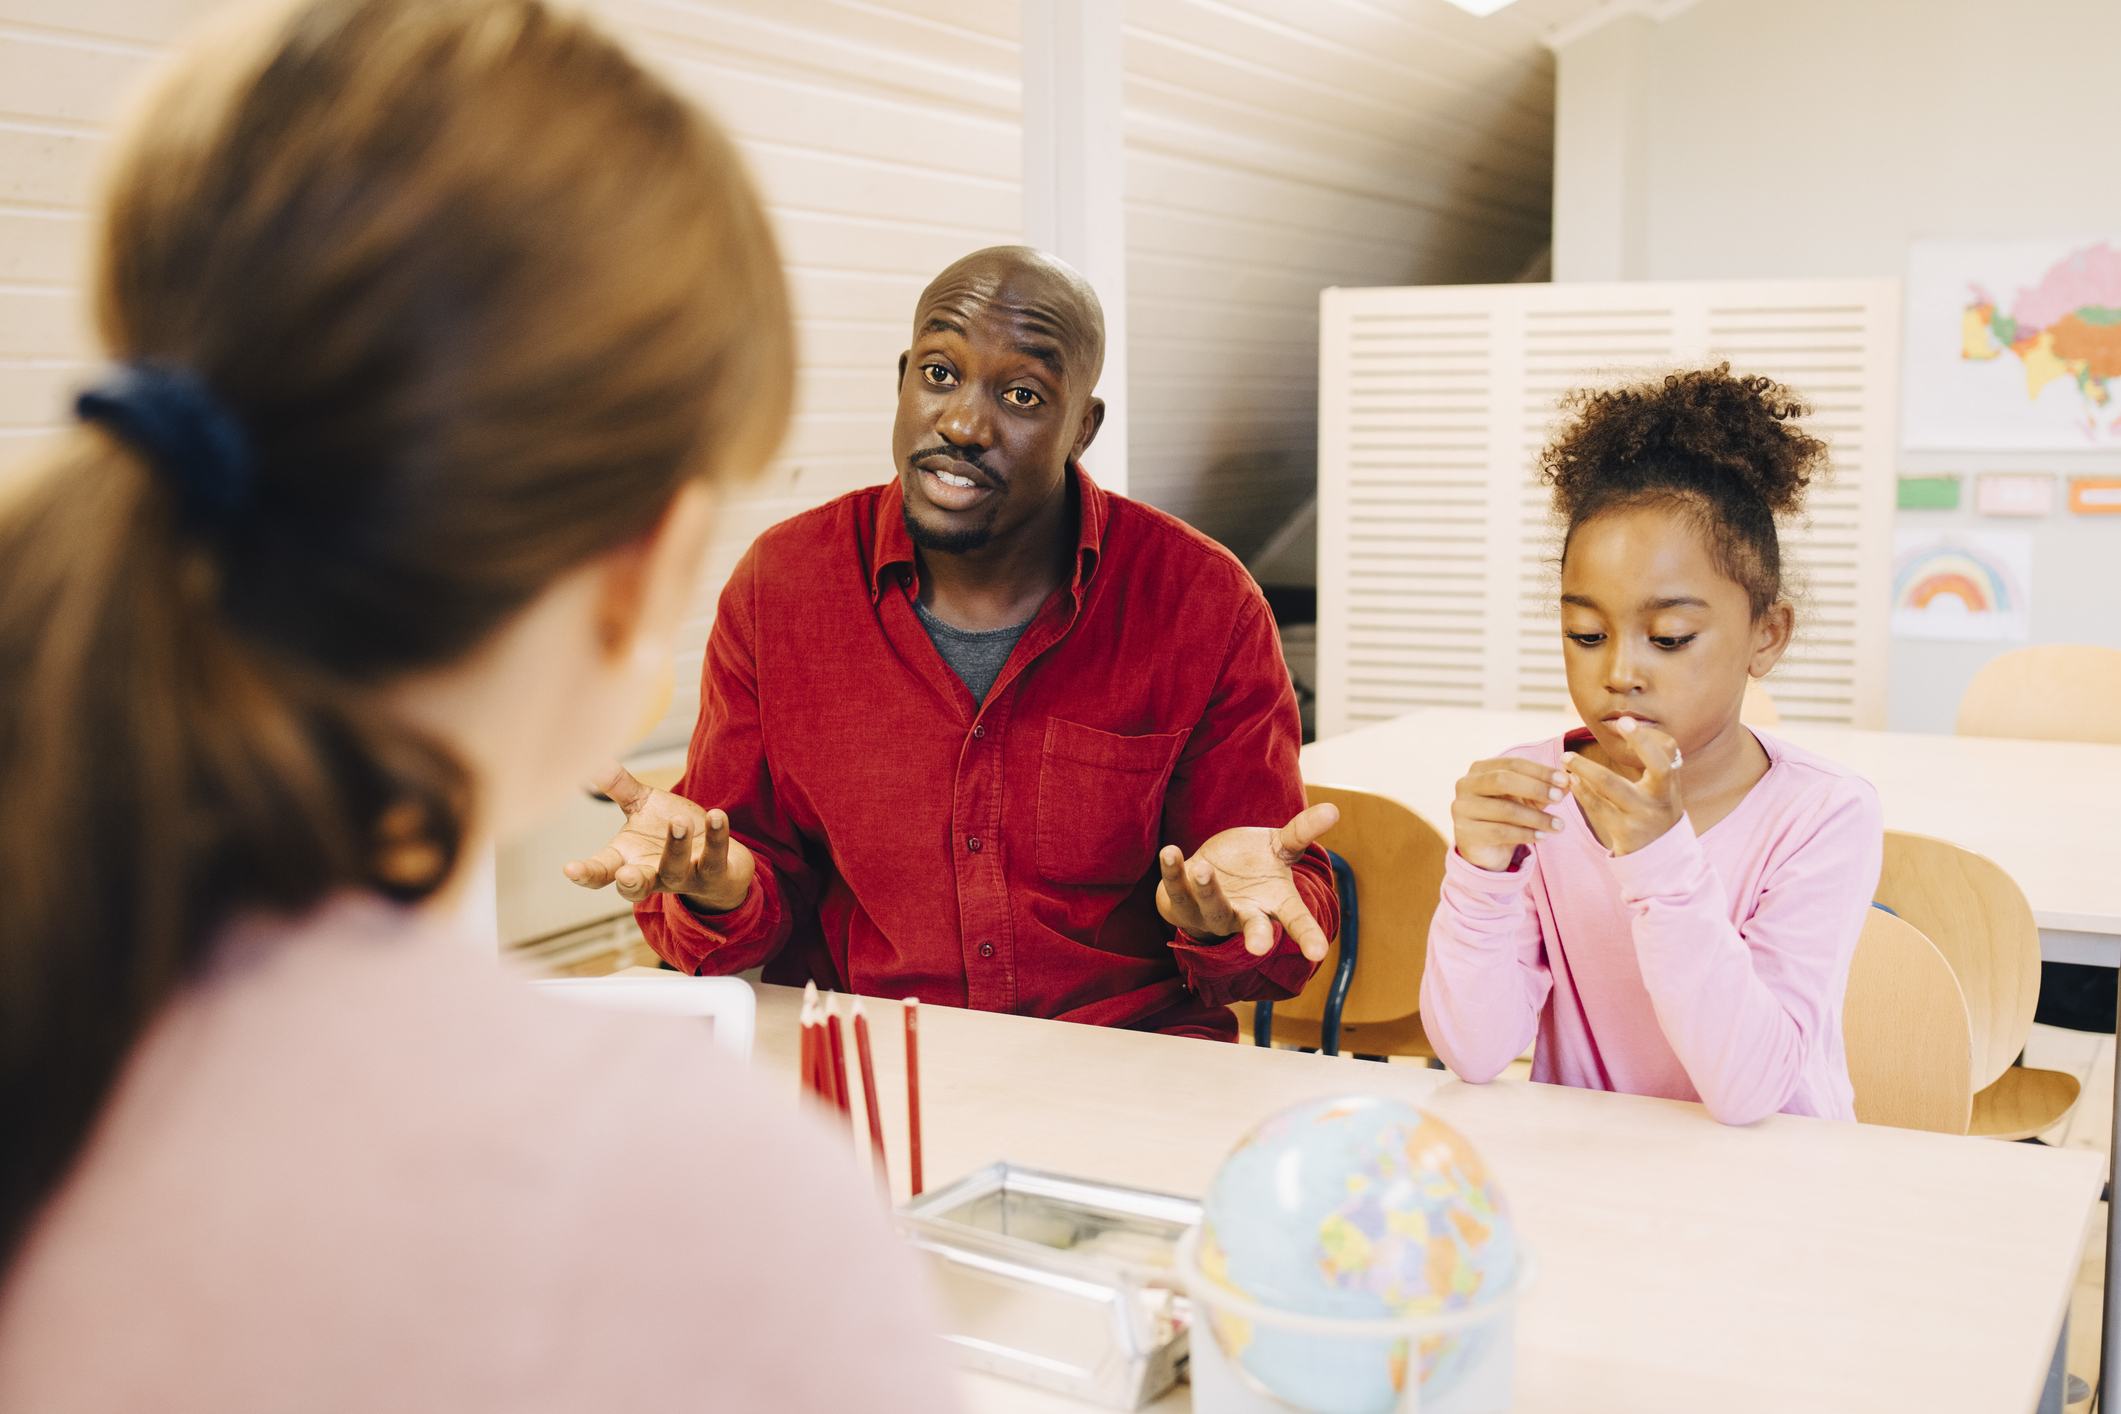 Adult explaining to child, child blowing bubbles at table, indoors, educational environment